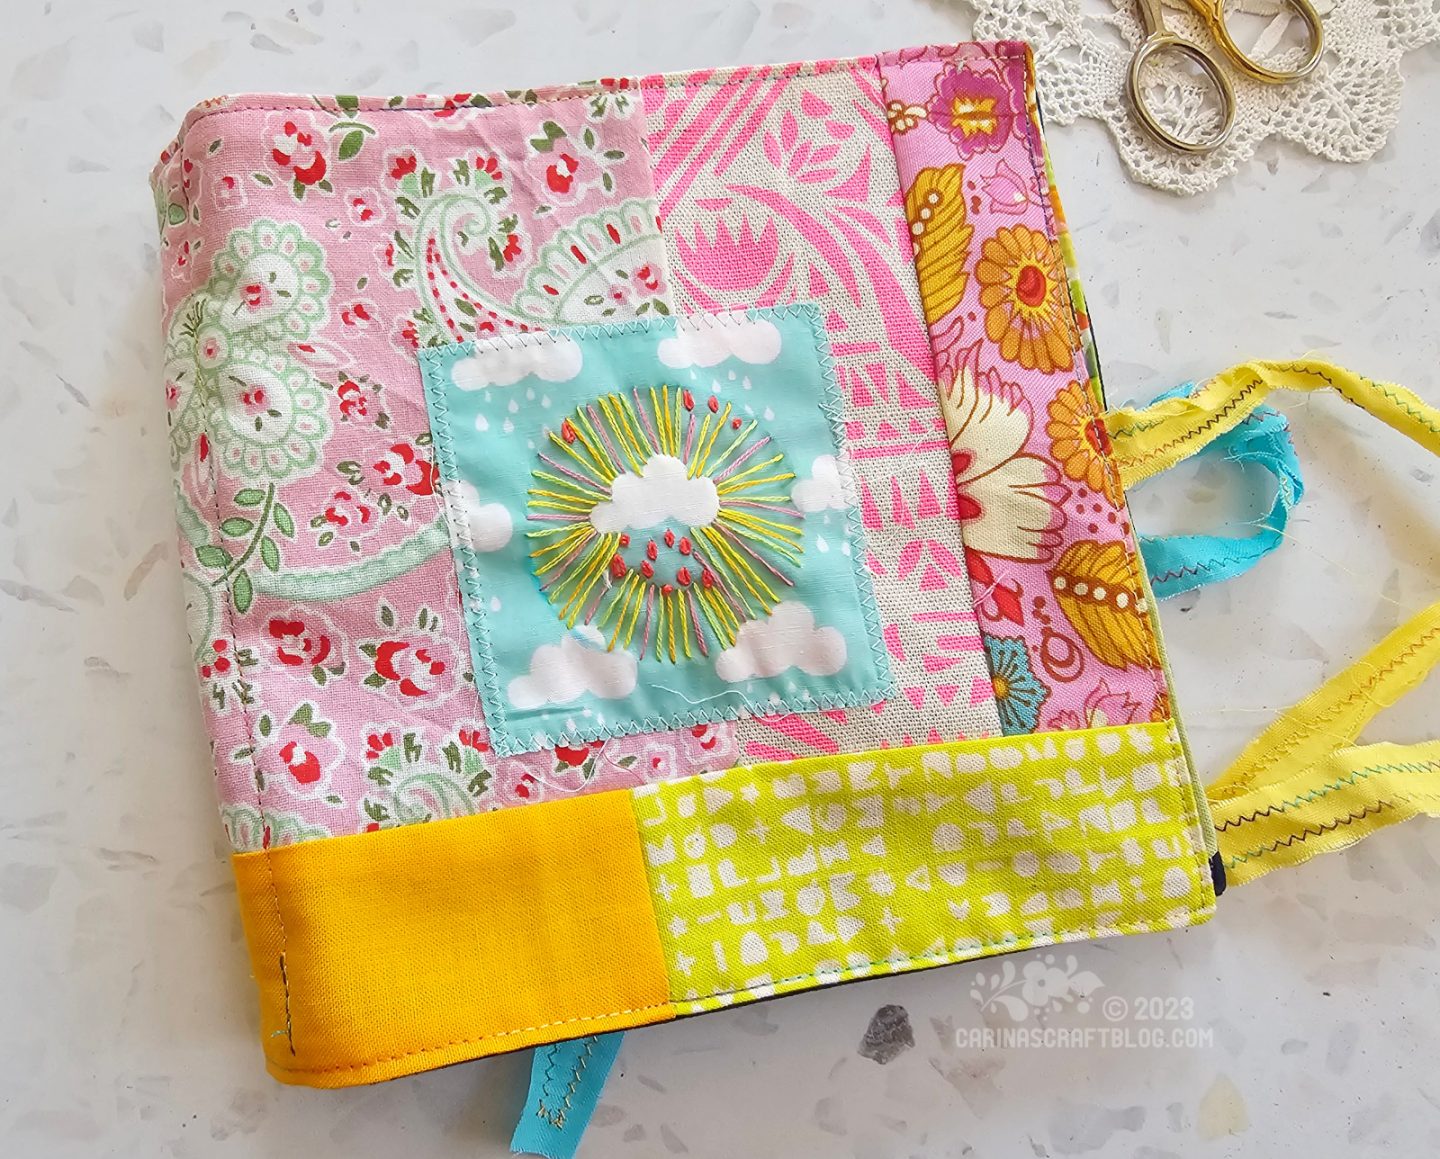 Overhead view of the front cover of a textile book. It is made of randomly sized squares and rectangles of pink, yellow and aqua fabrics.